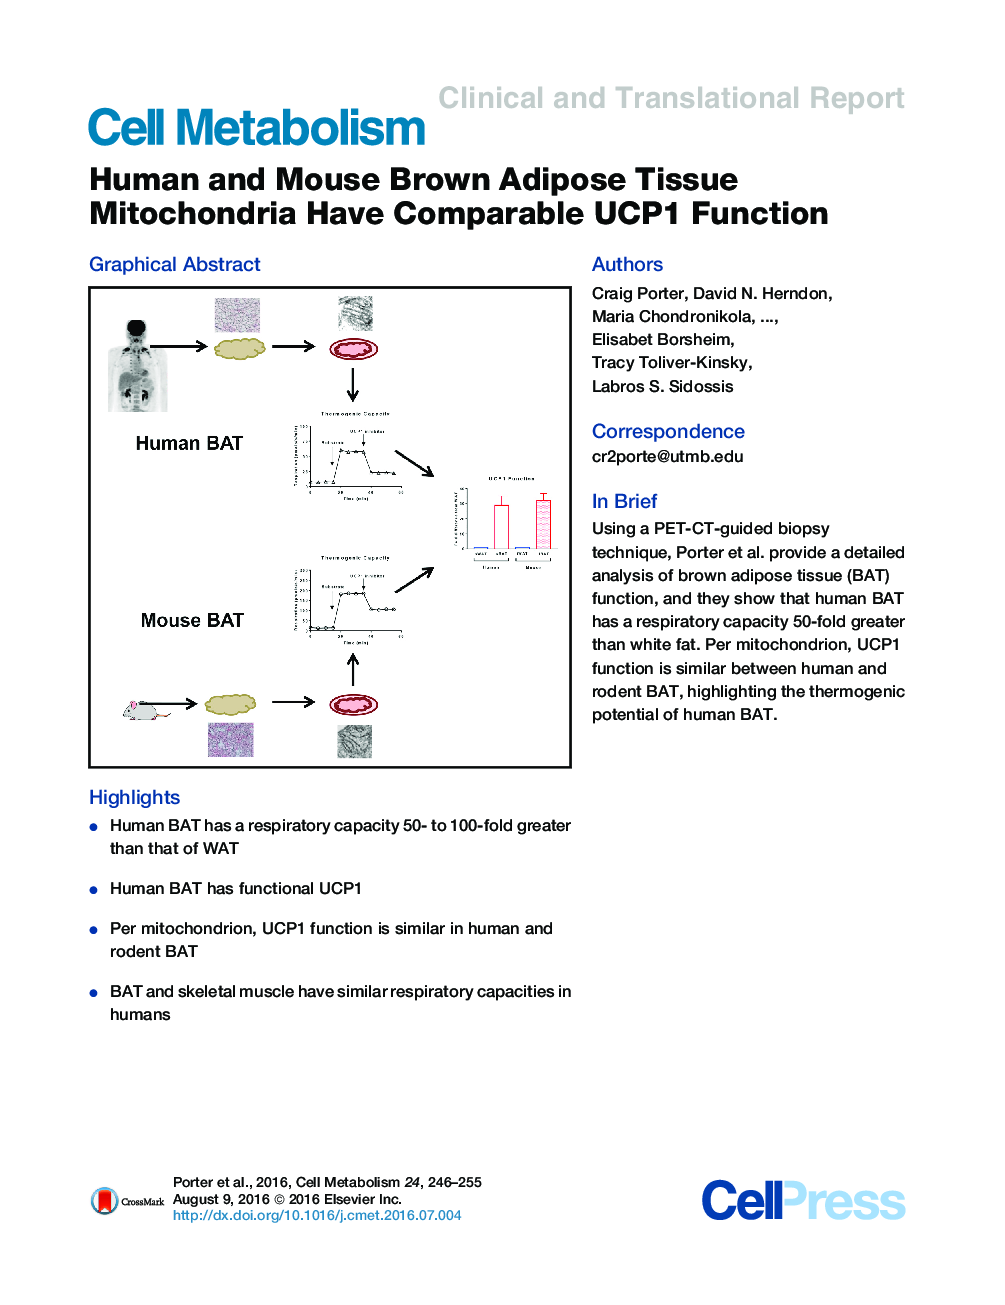 Human and Mouse Brown Adipose Tissue Mitochondria Have Comparable UCP1 Function